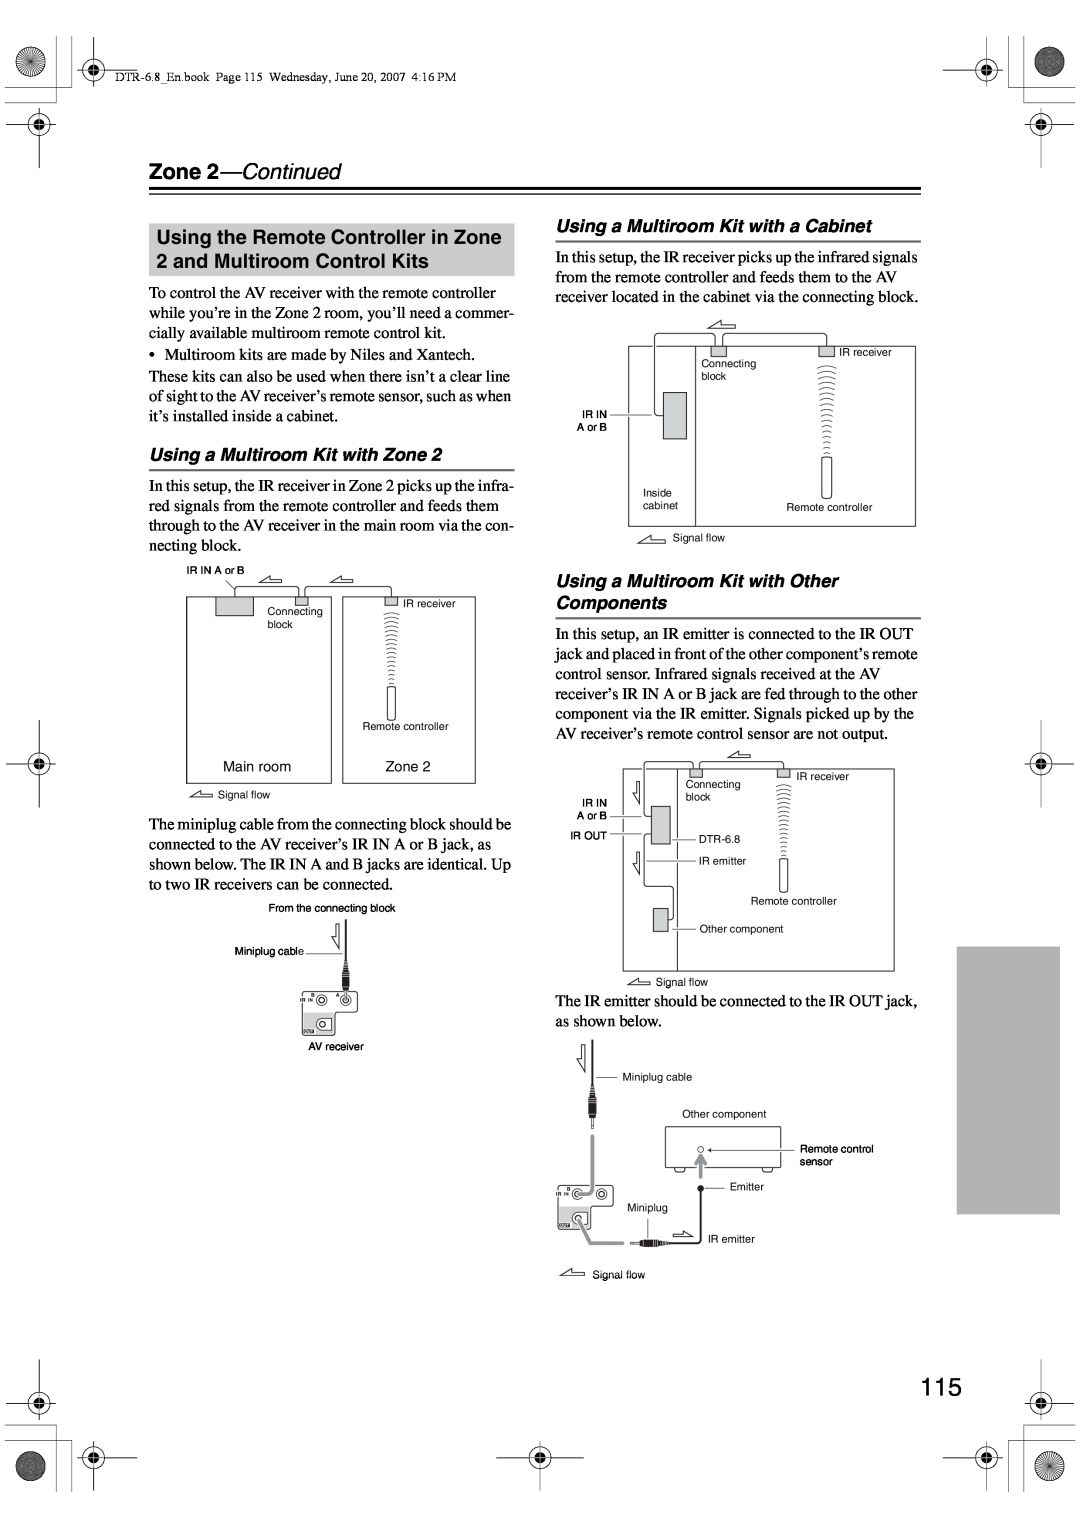 Integra DTR-6.8 instruction manual Using a Multiroom Kit with a Cabinet, Using a Multiroom Kit with Zone, Zone 2—Continued 